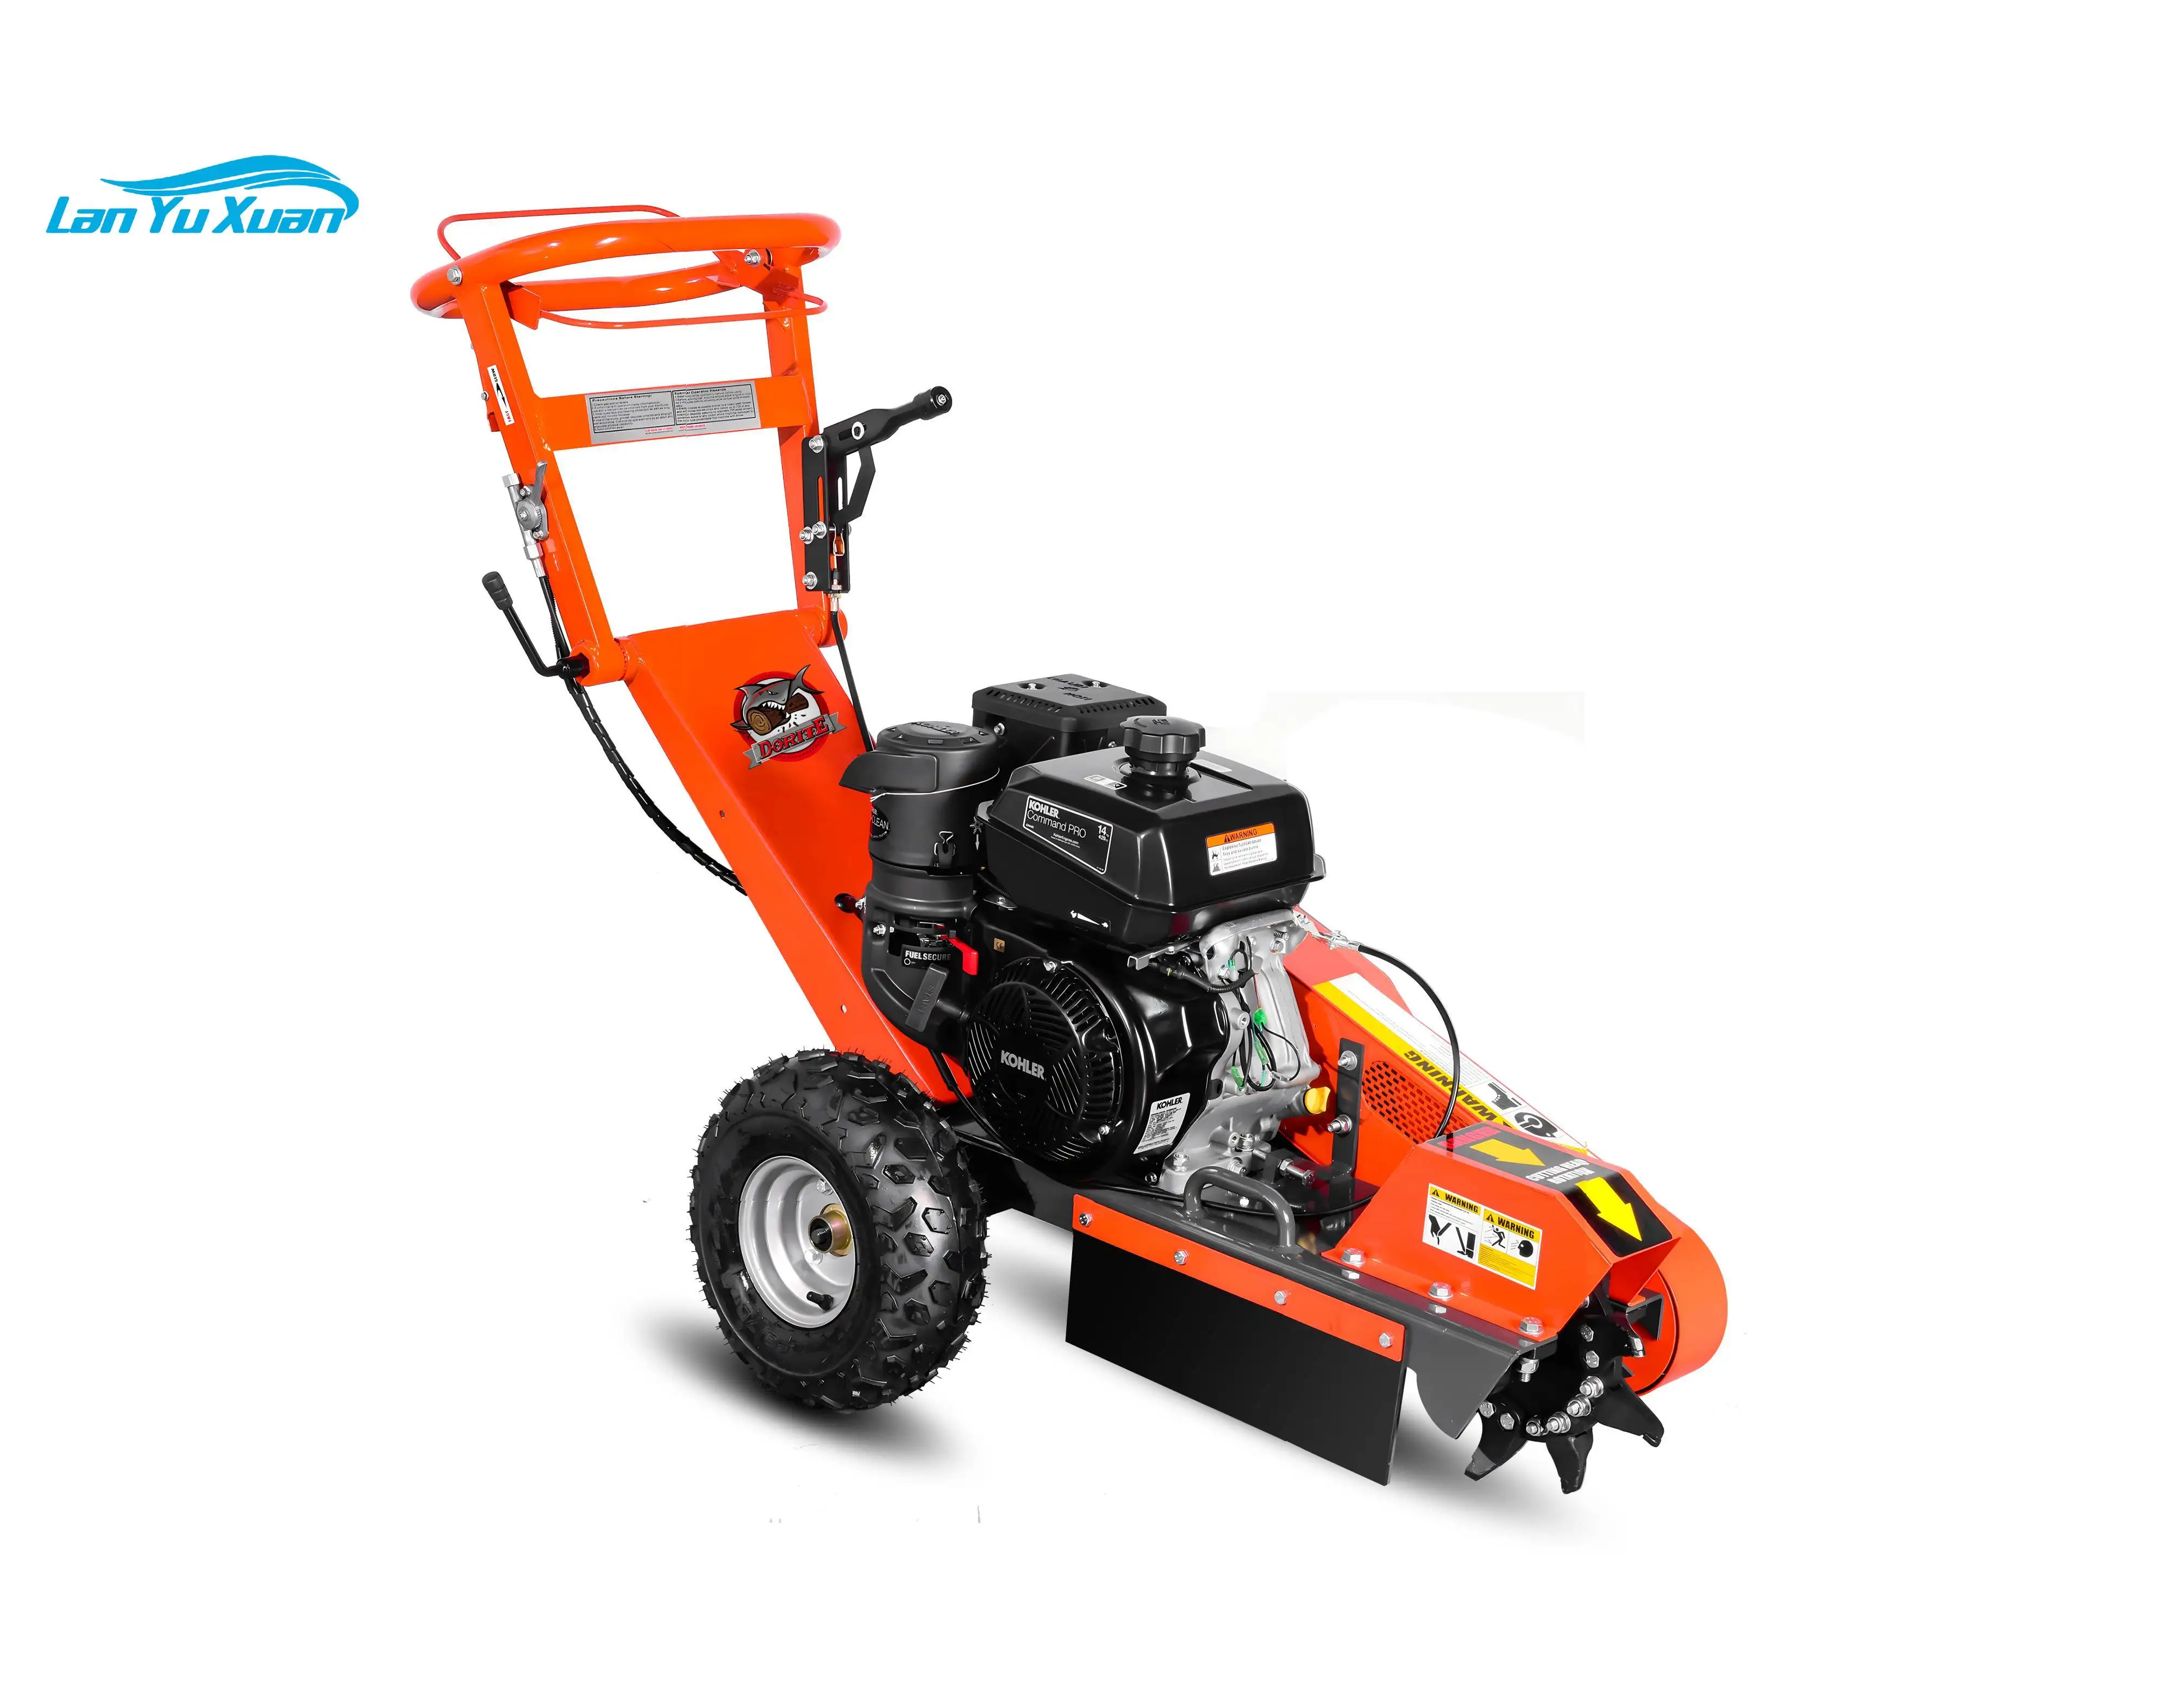 

Durable High Quality15HP Gasoline Powder Coating Process Tree Root Removal Machine Mini Skid Steer Wood Stump Grinder